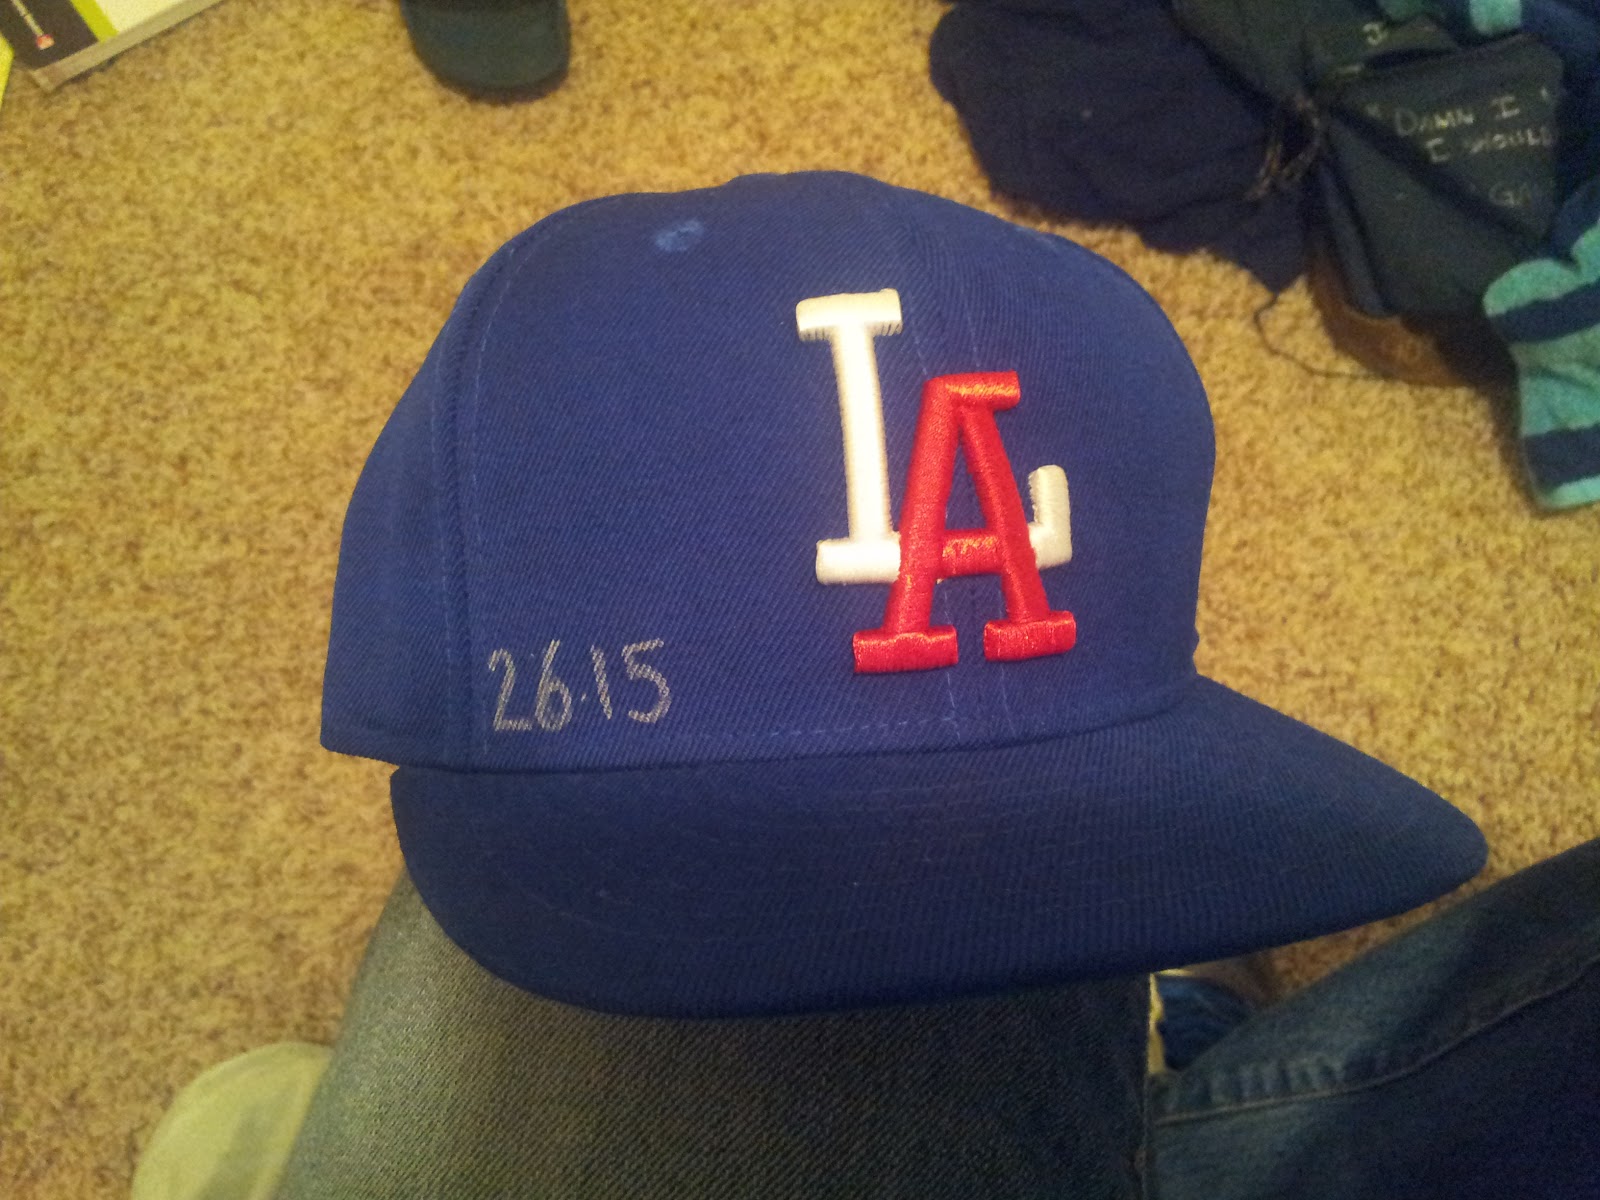 Hats and Tats: A Lifestyle: January 23- Los Angeles Angels